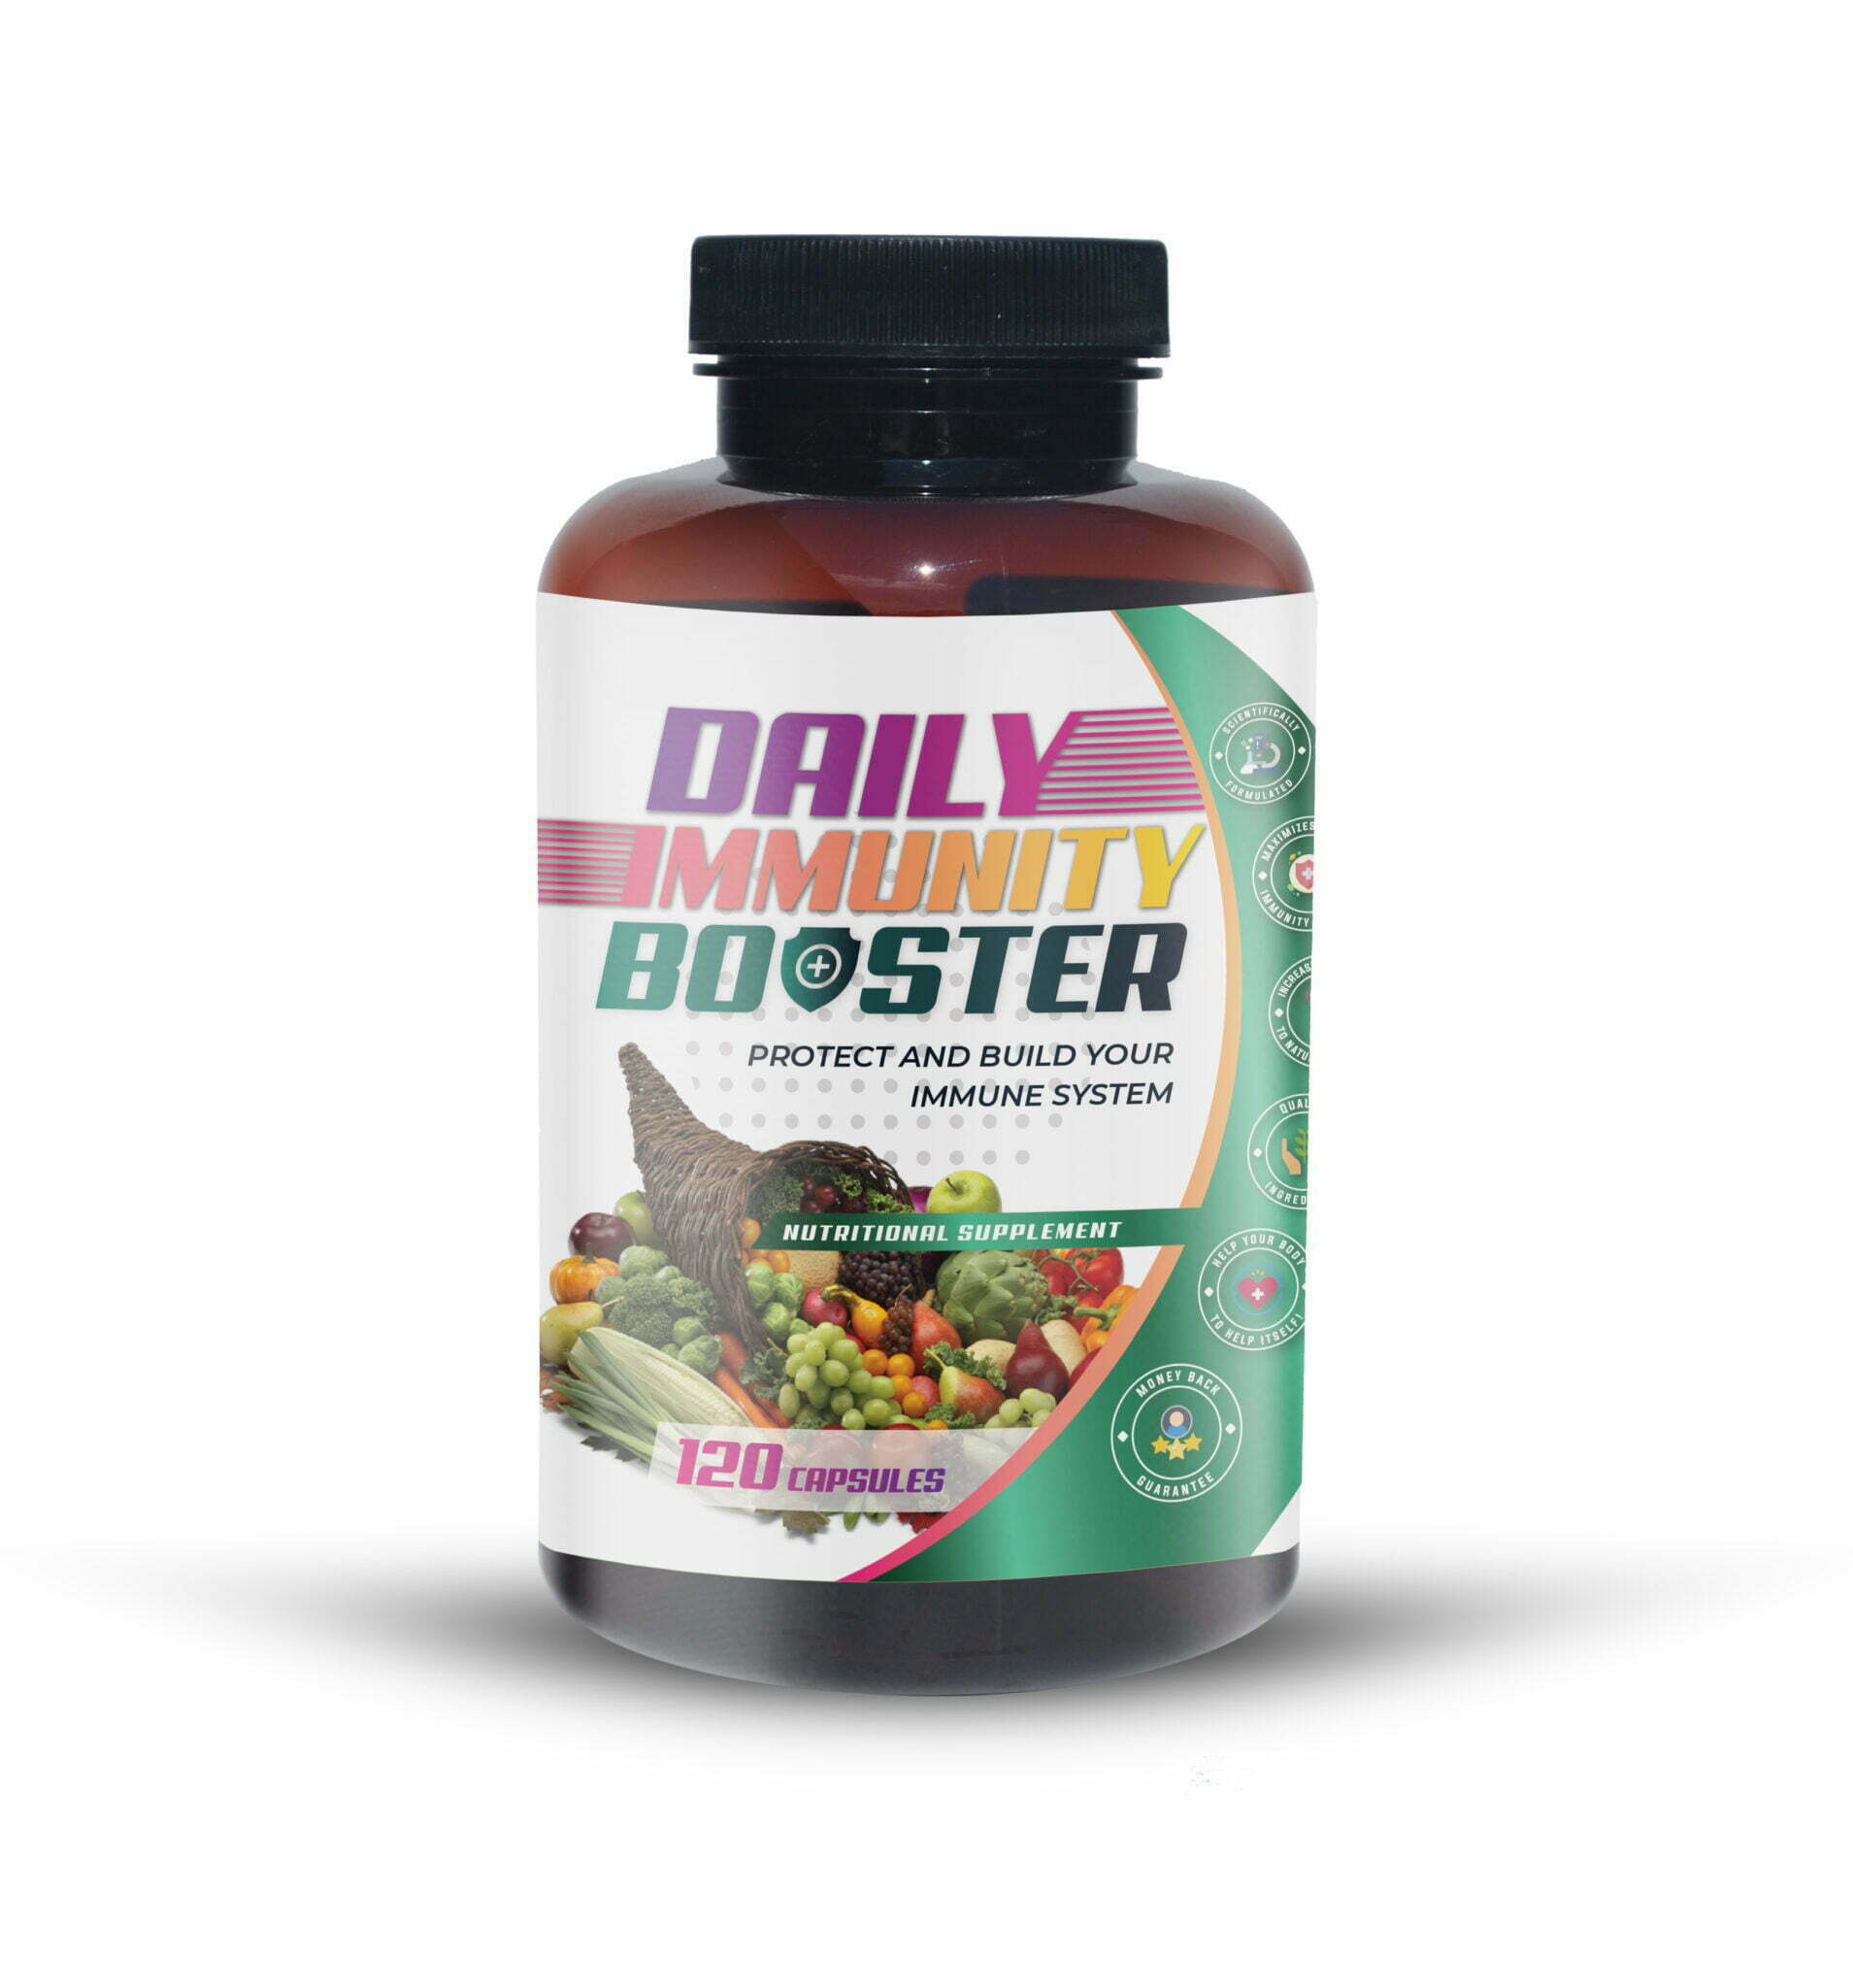 Daily-immunity-booster-120-1909x2048